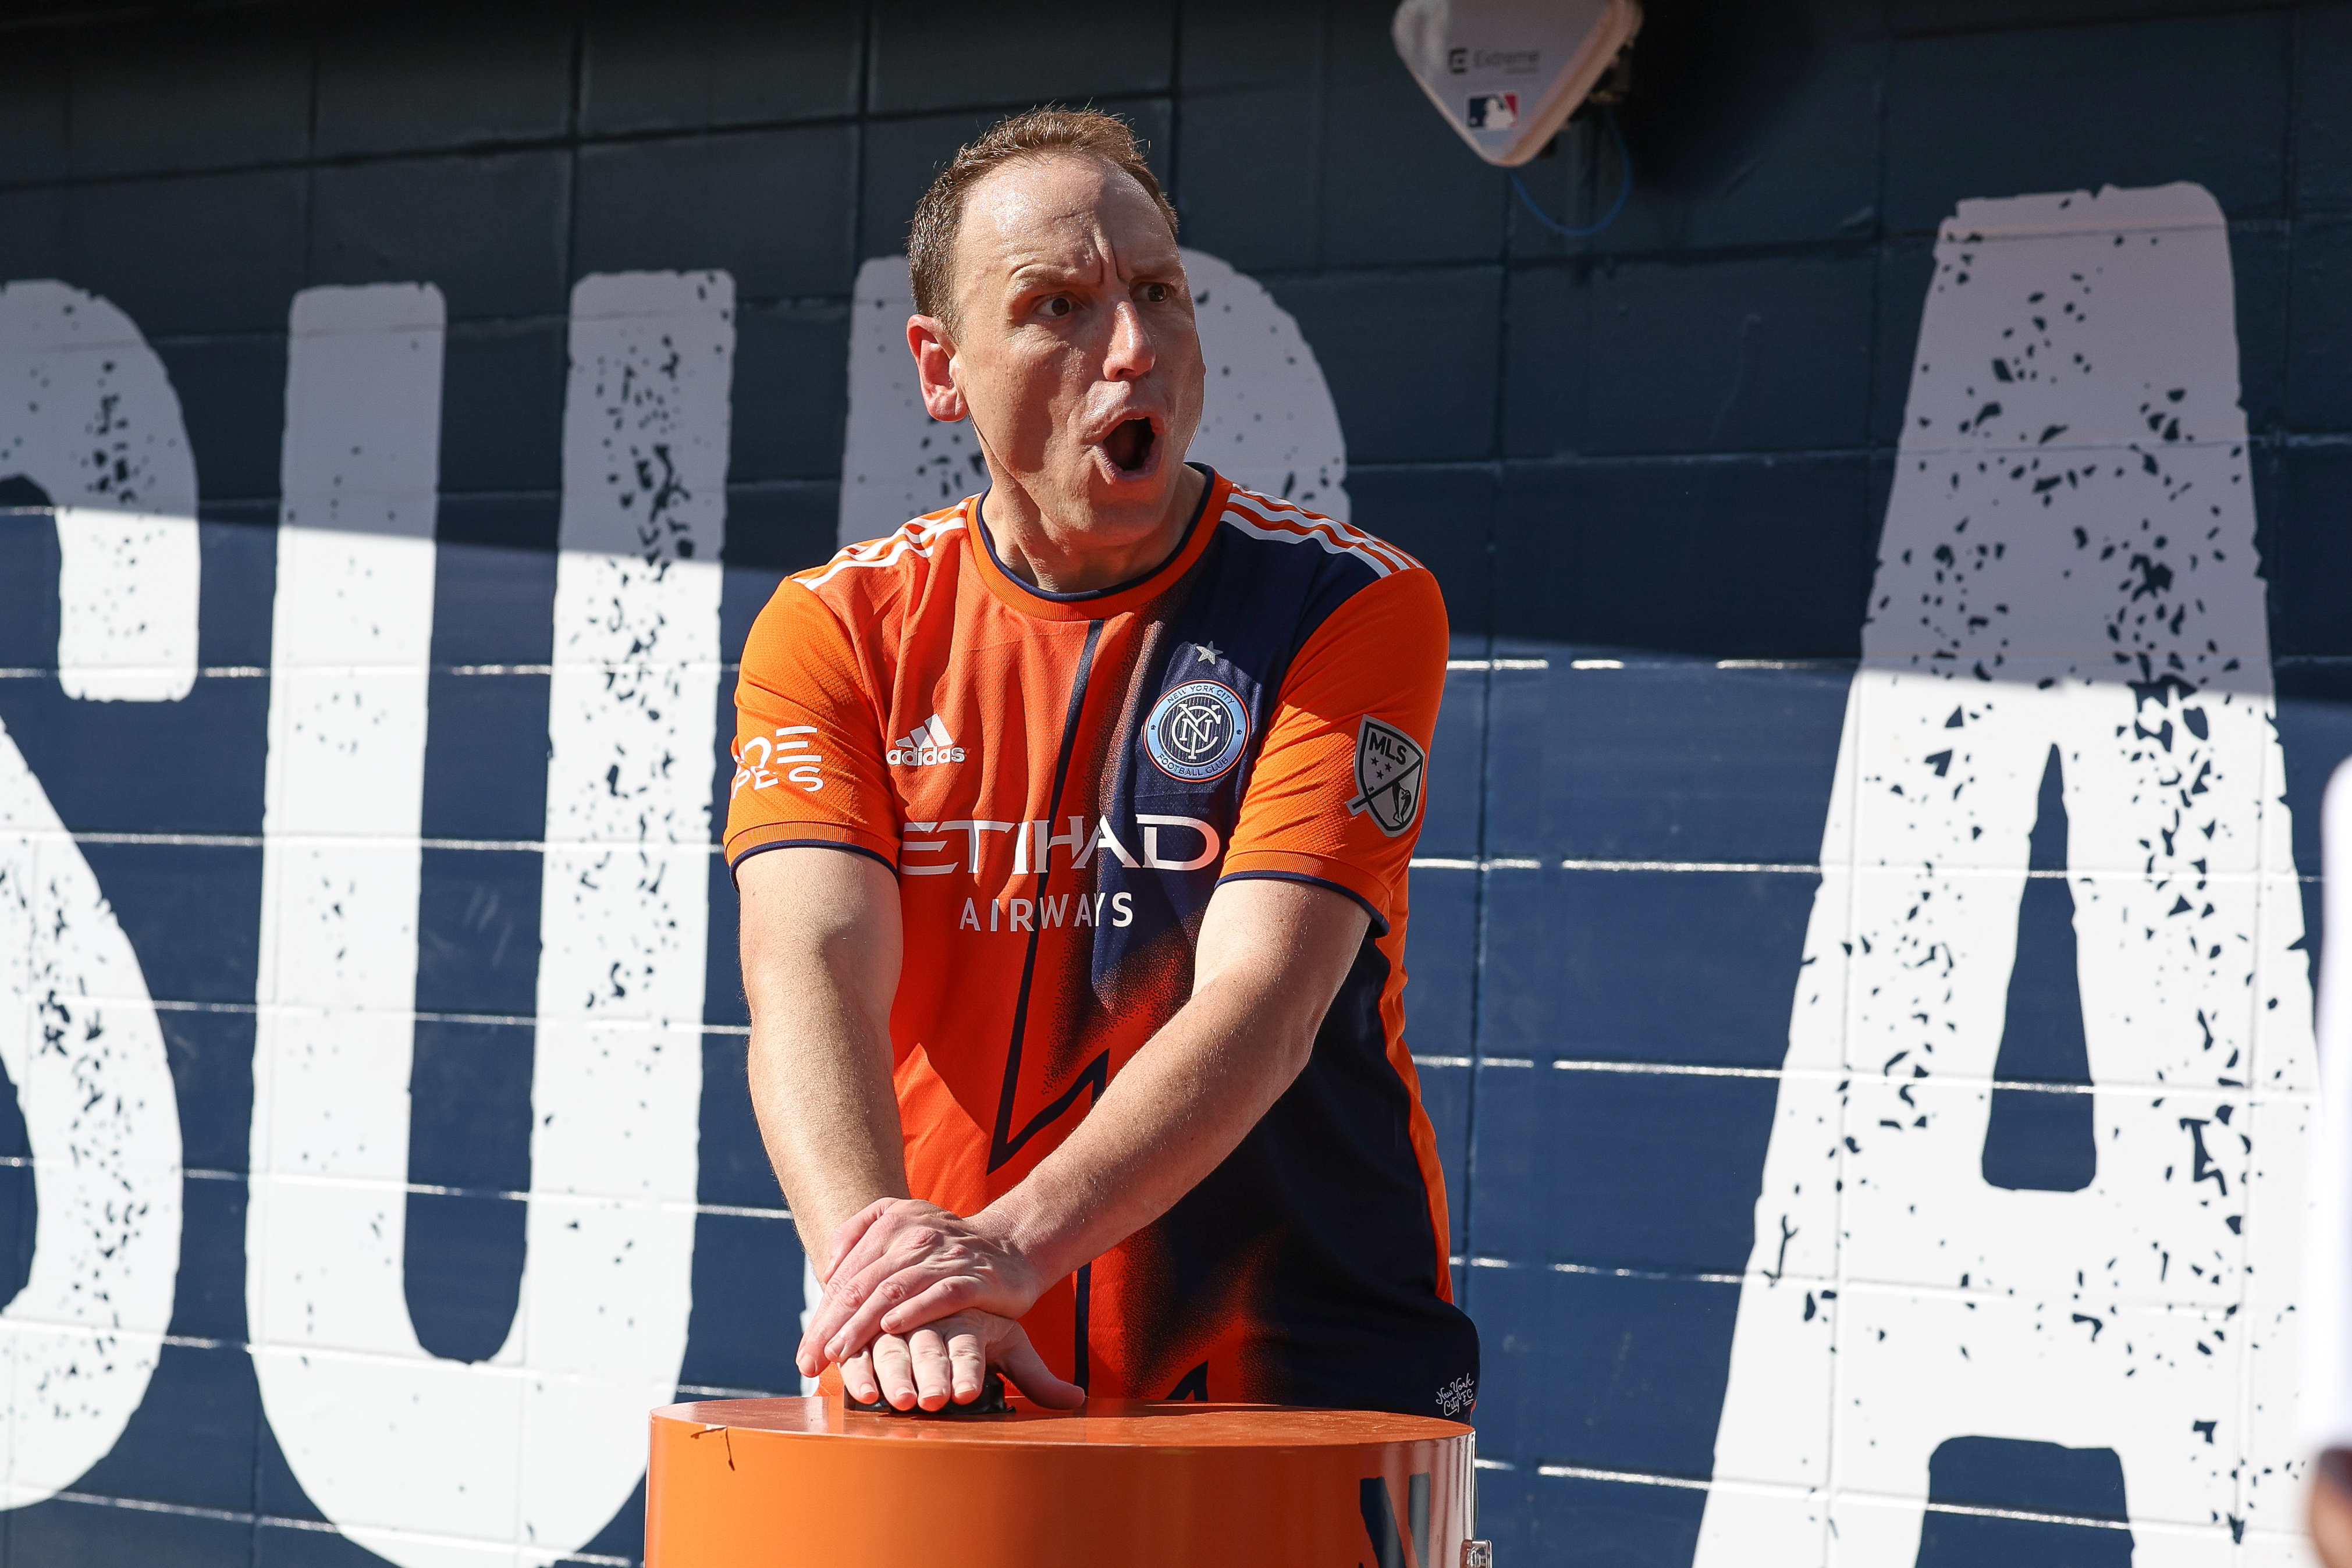 American competitive eater Joey Chestnut ignited the smoke stacks before the game between New York City FC and Atlanta United at Yankee Stadium.